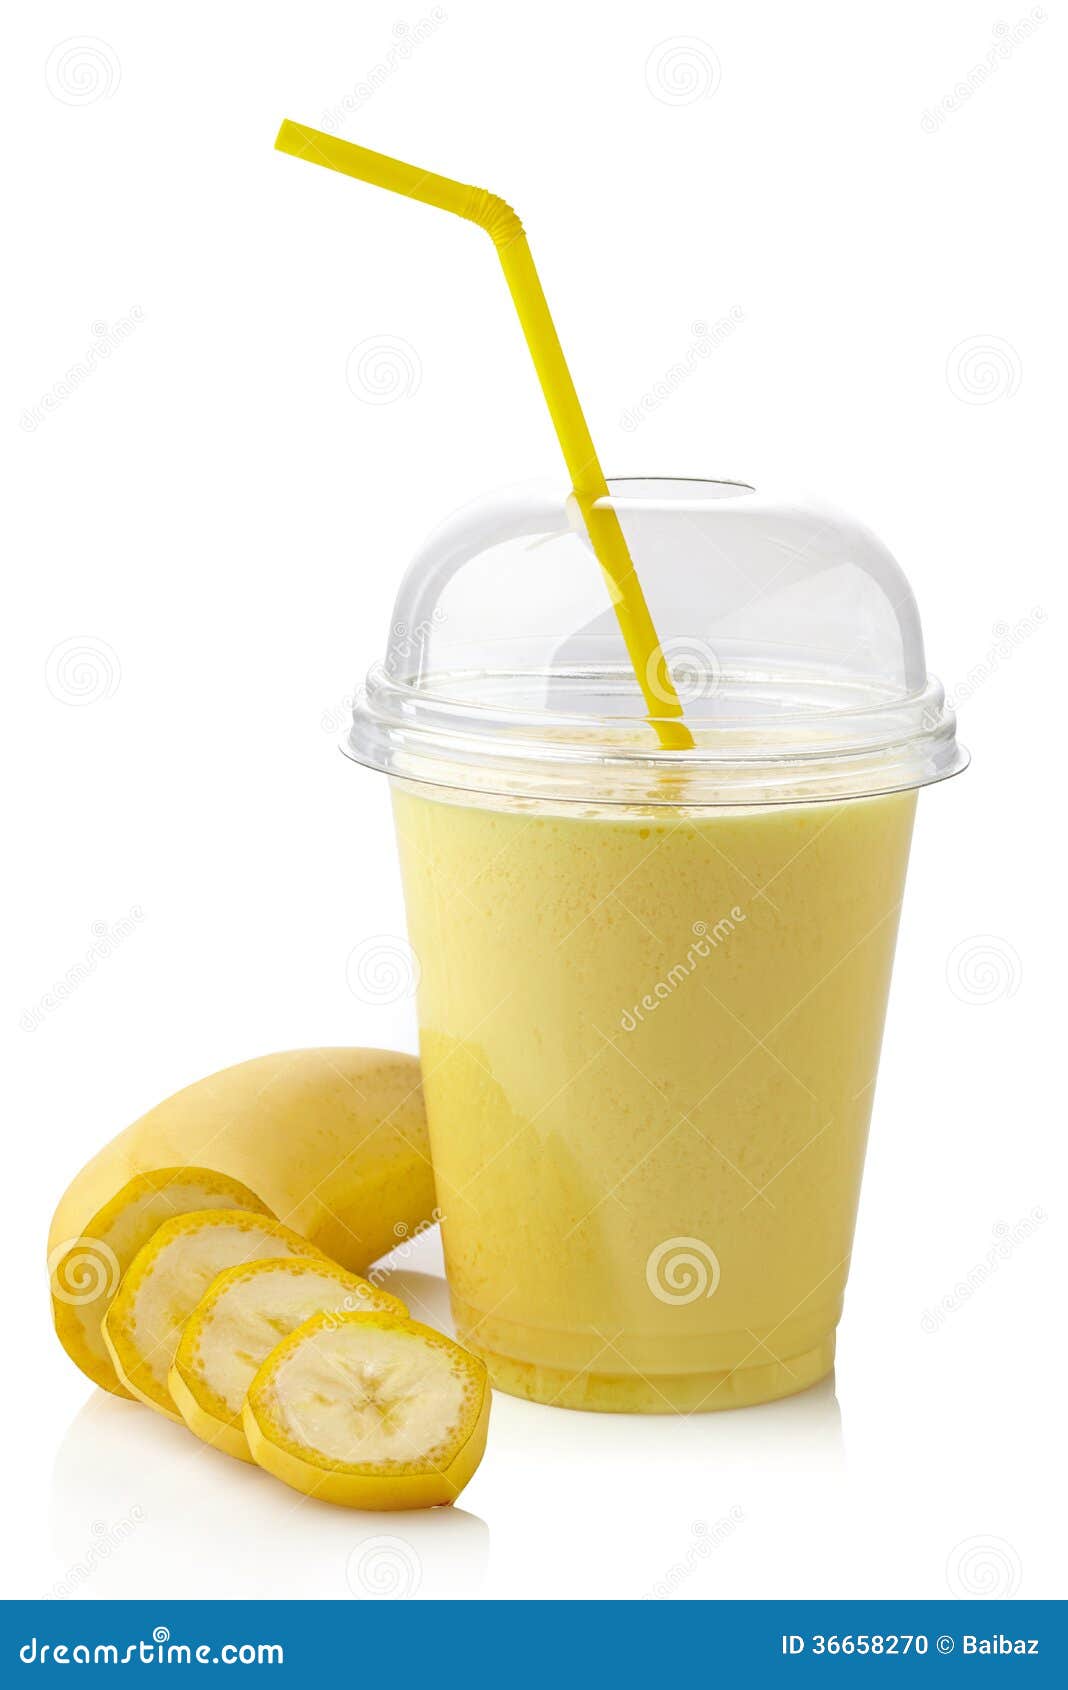 https://thumbs.dreamstime.com/z/banana-smoothie-glass-isolated-white-background-36658270.jpg